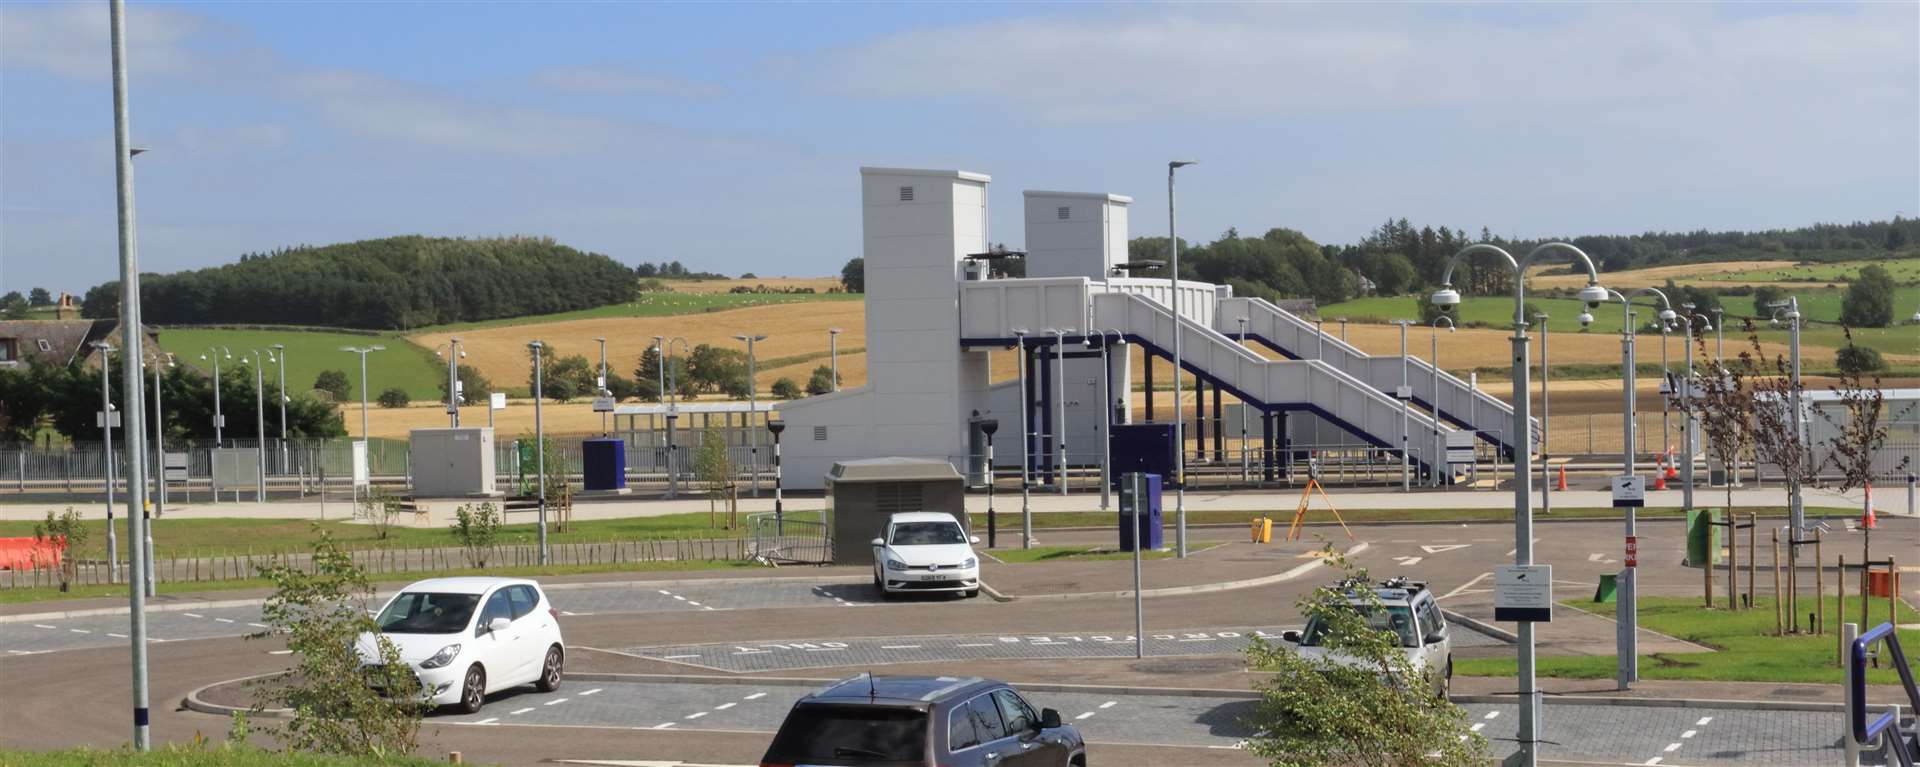 Kintore Train Station was cited as an example of investment - but is not part of the £200million scheme.